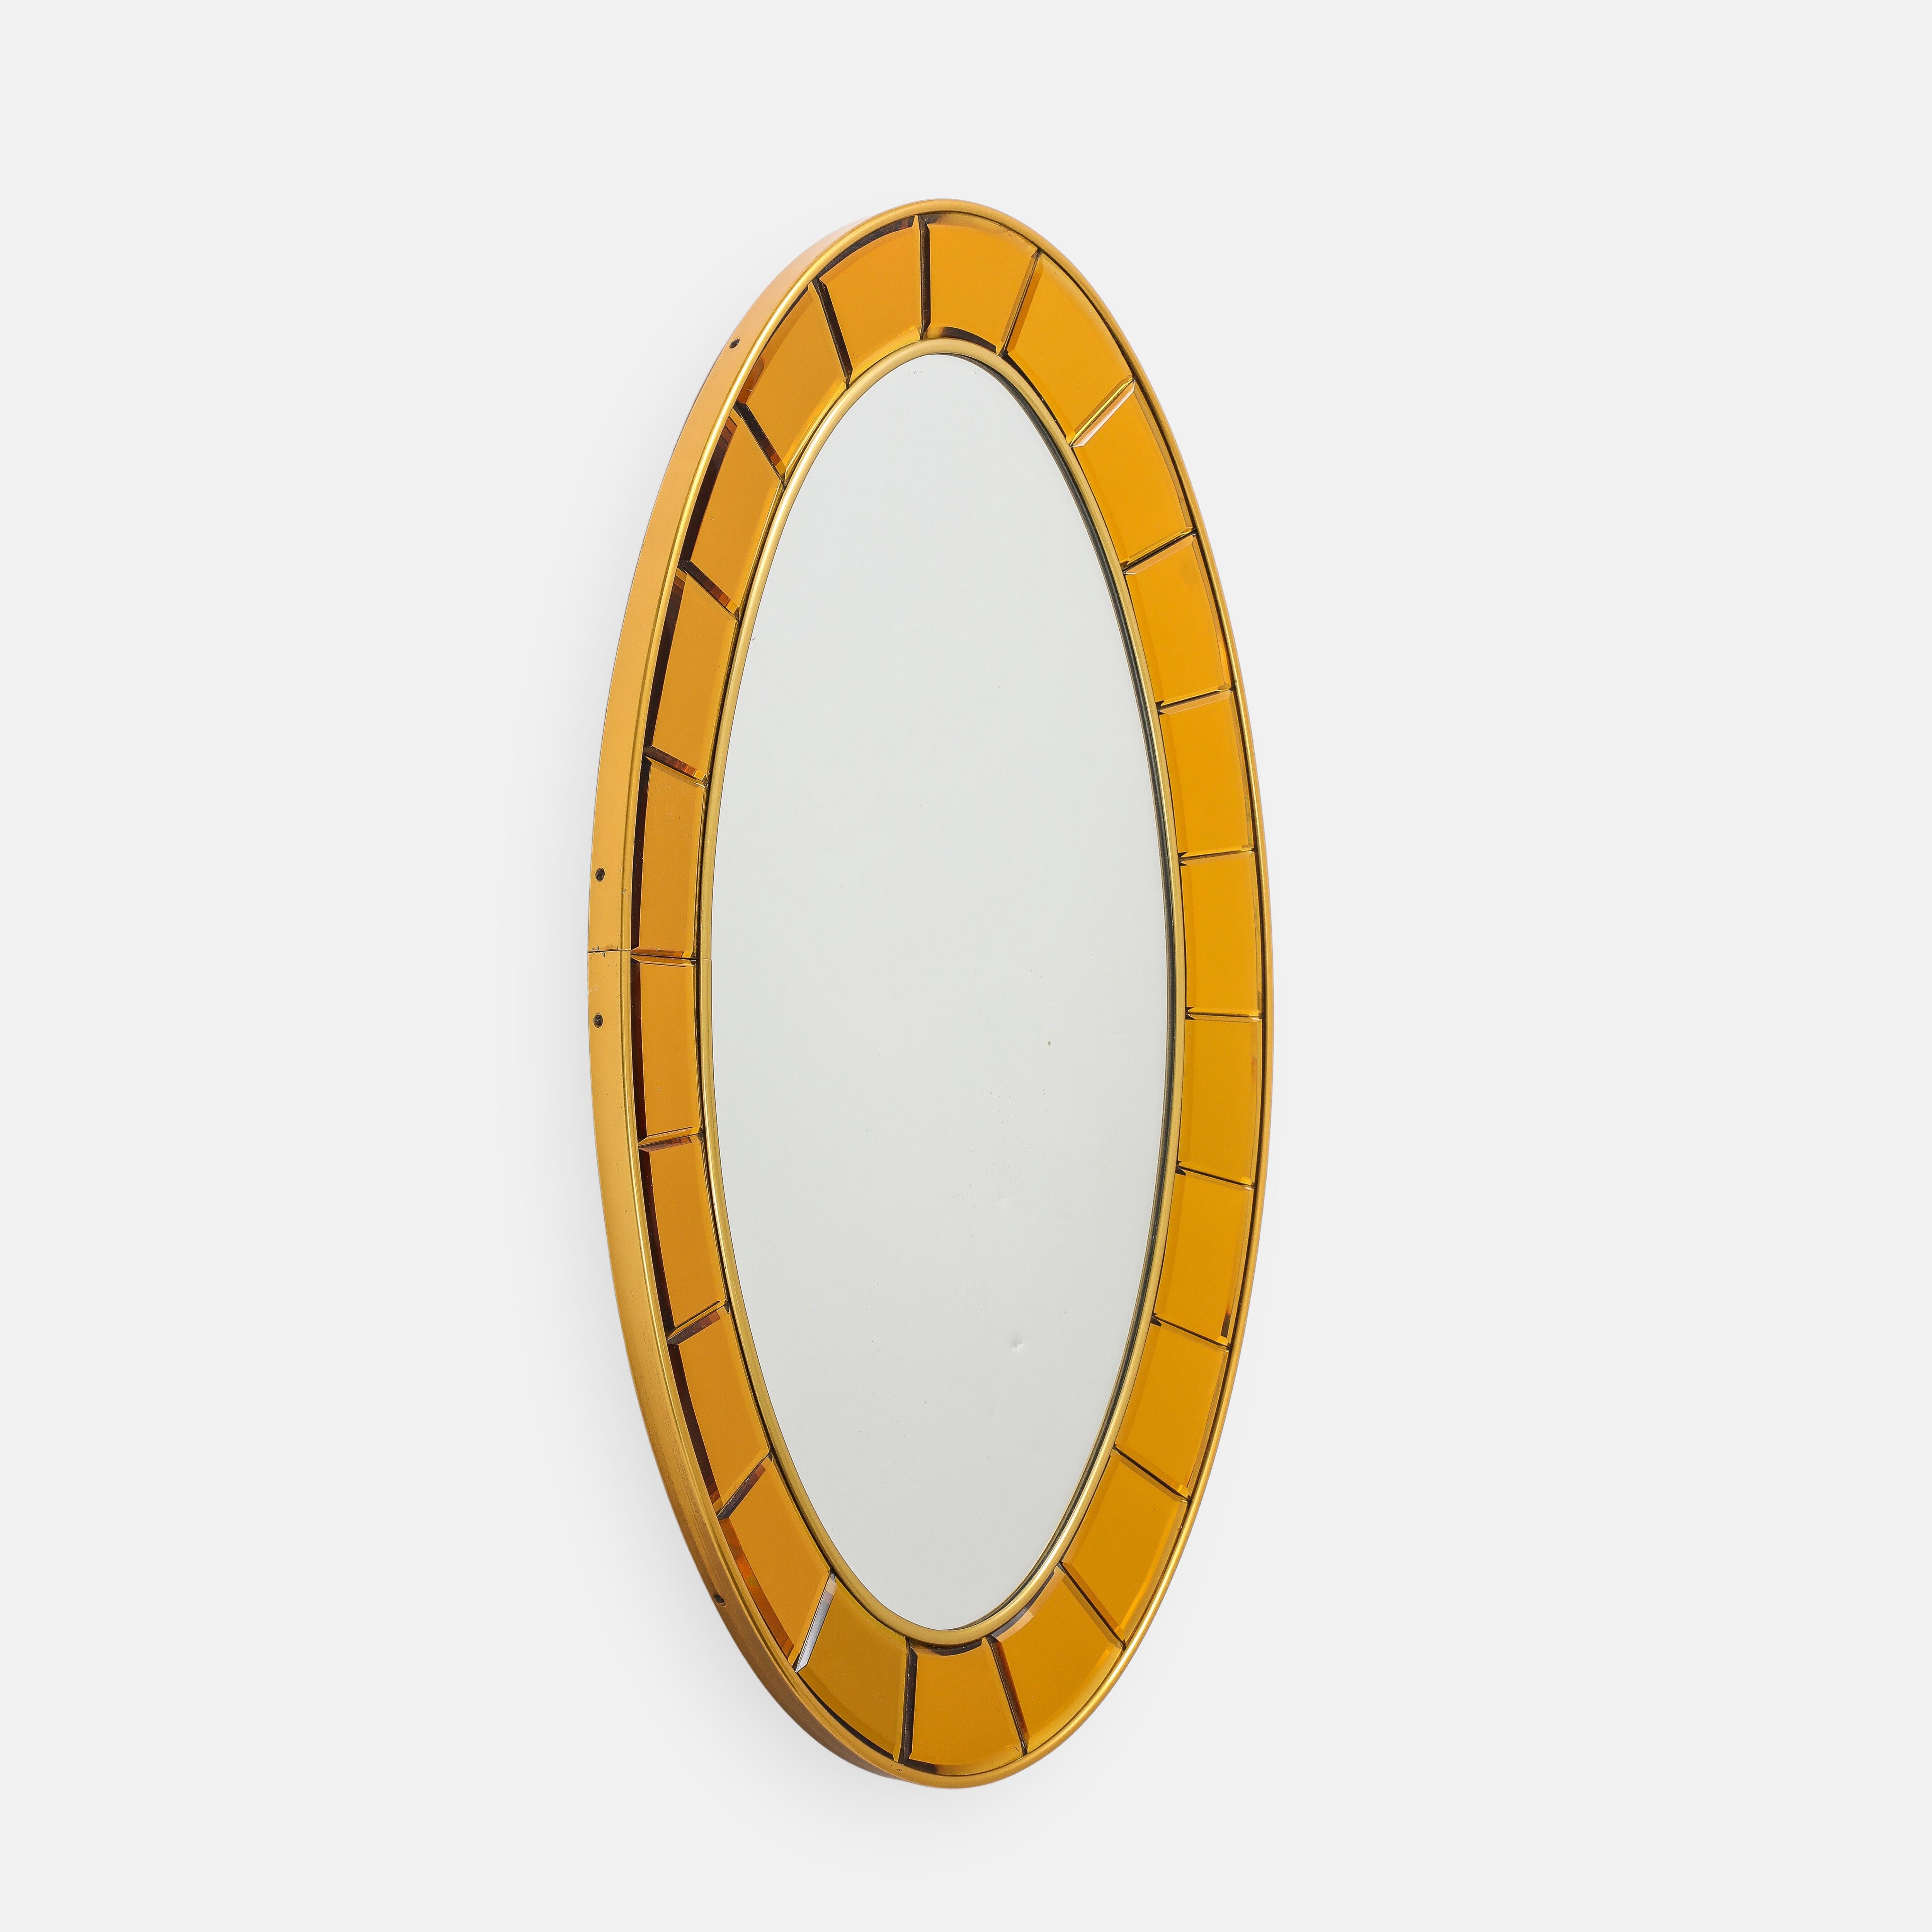 Cristal Art exquisite original oval mirror model 2727 with gold hand-cut, beveled crystal glass pieces framed by gilt brass borders and mirrored glass on a wooden backing. This stunning mirror is hand-crafted with intense bright blue beveled